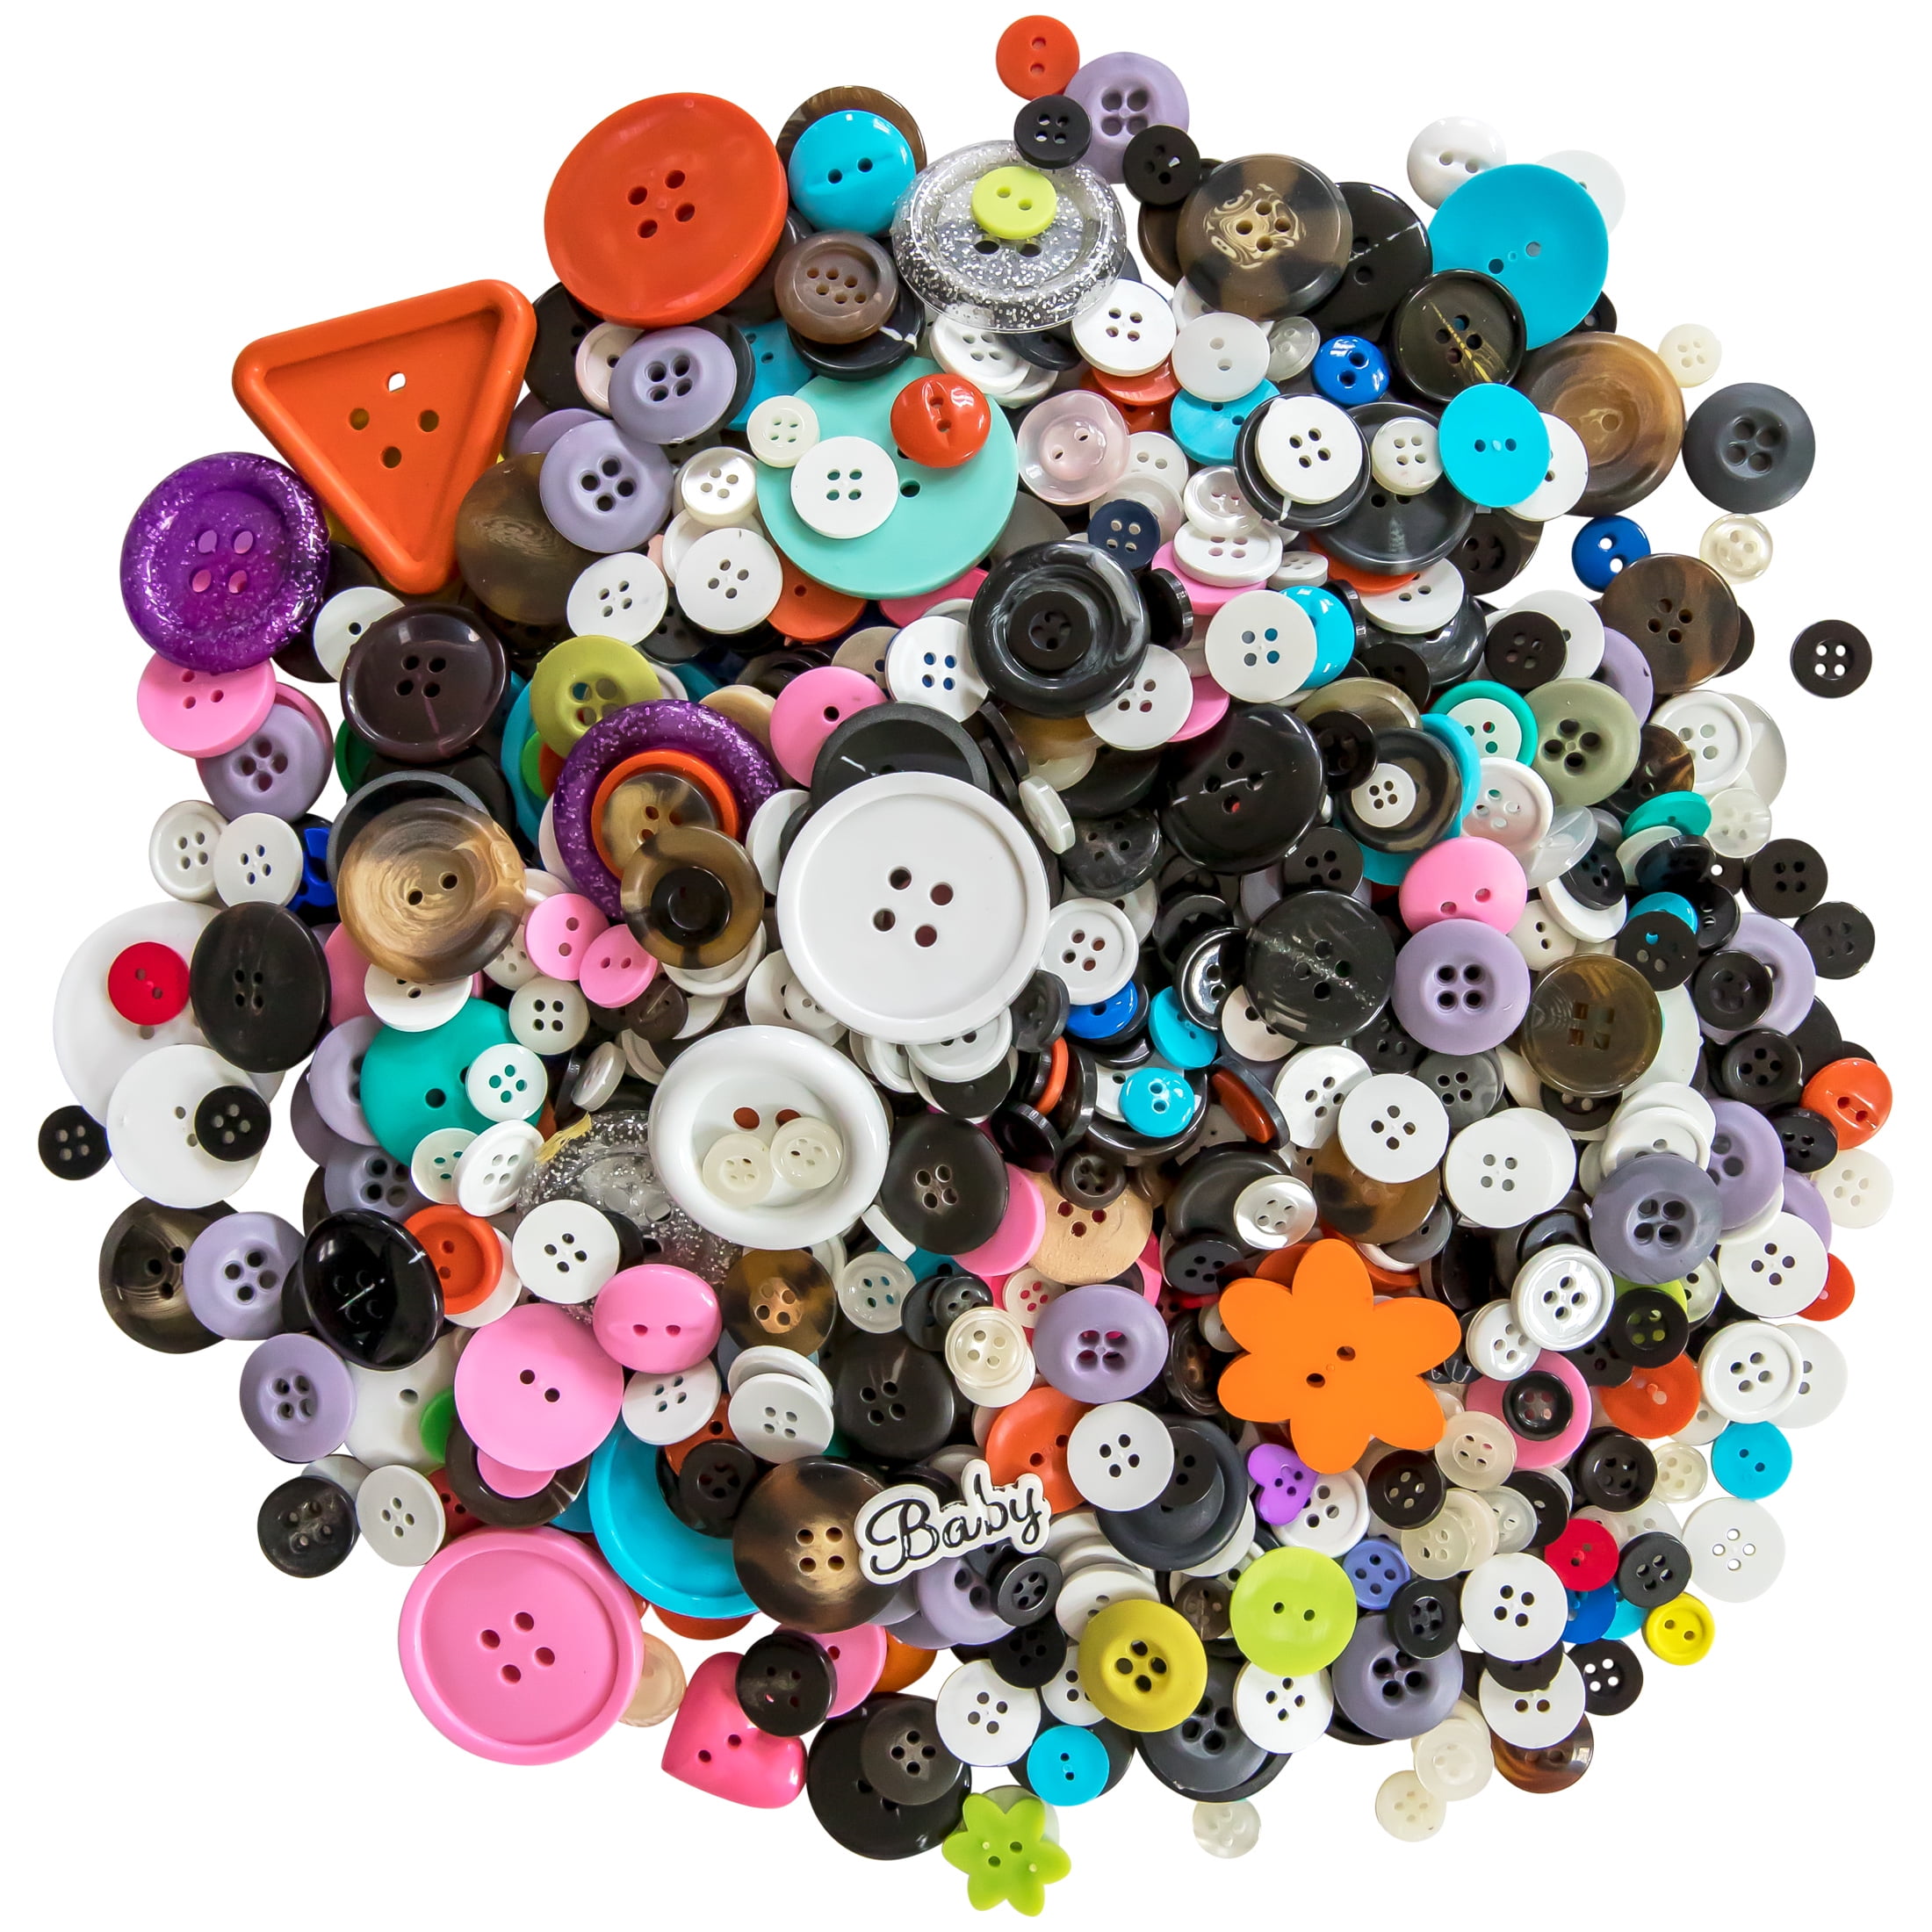 Le Bouton Pound of Buttons